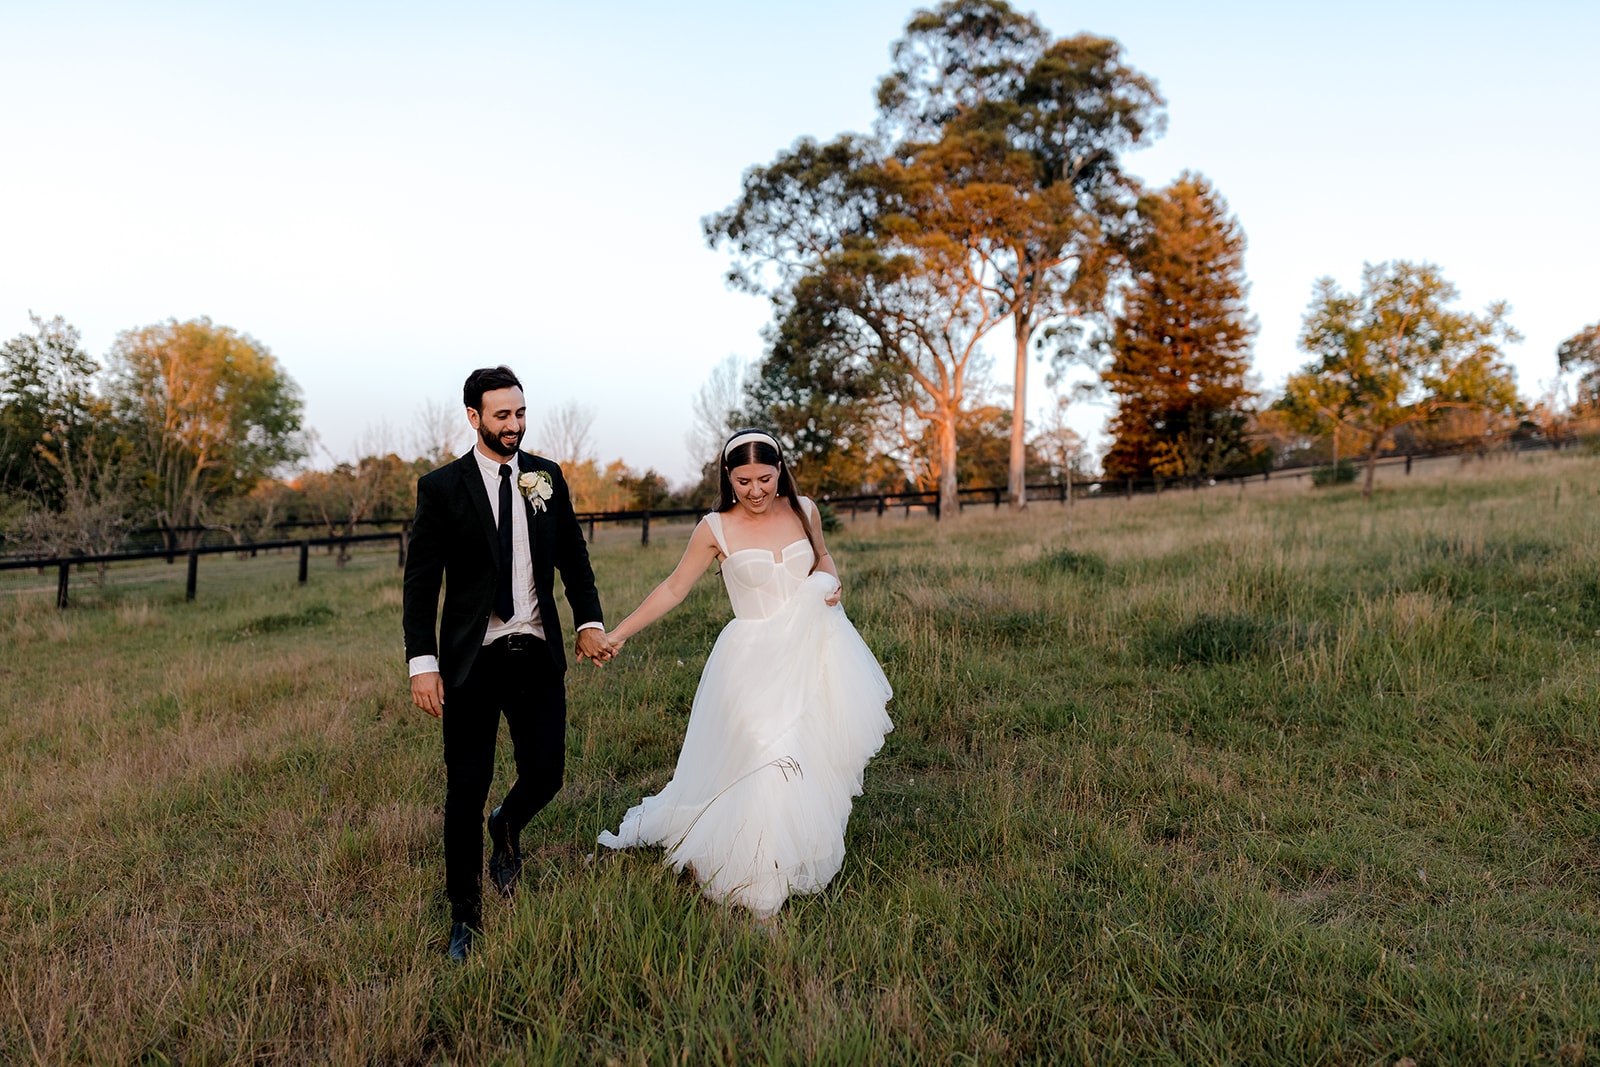 Bride & groom walking hand-in-hand at sunset during their elegant country wedding.